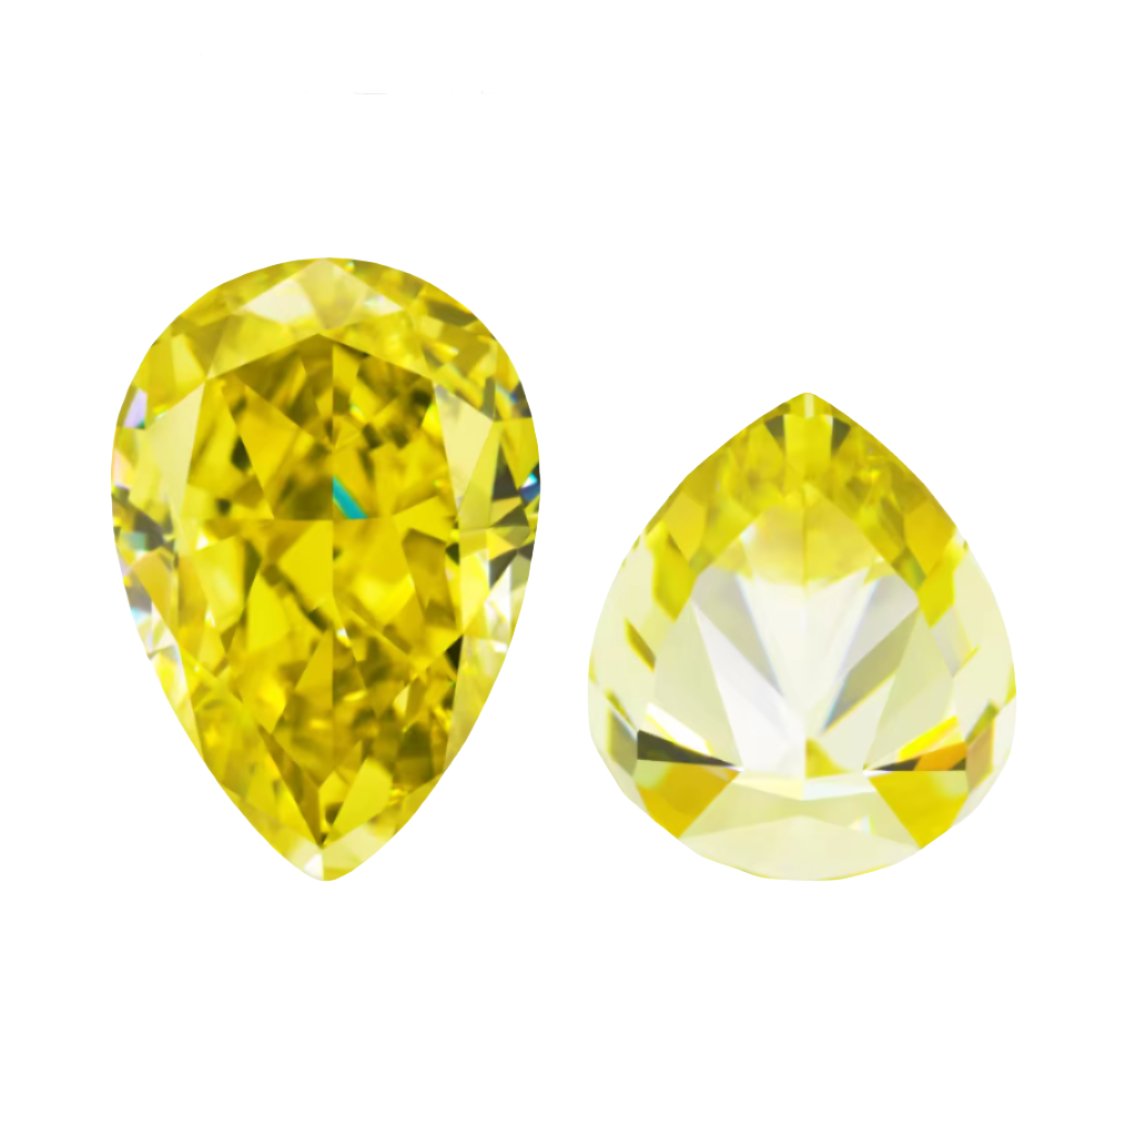 Canary Yellow Pear Cut Crushed Ice Moissanite Stones - Boutique CZ